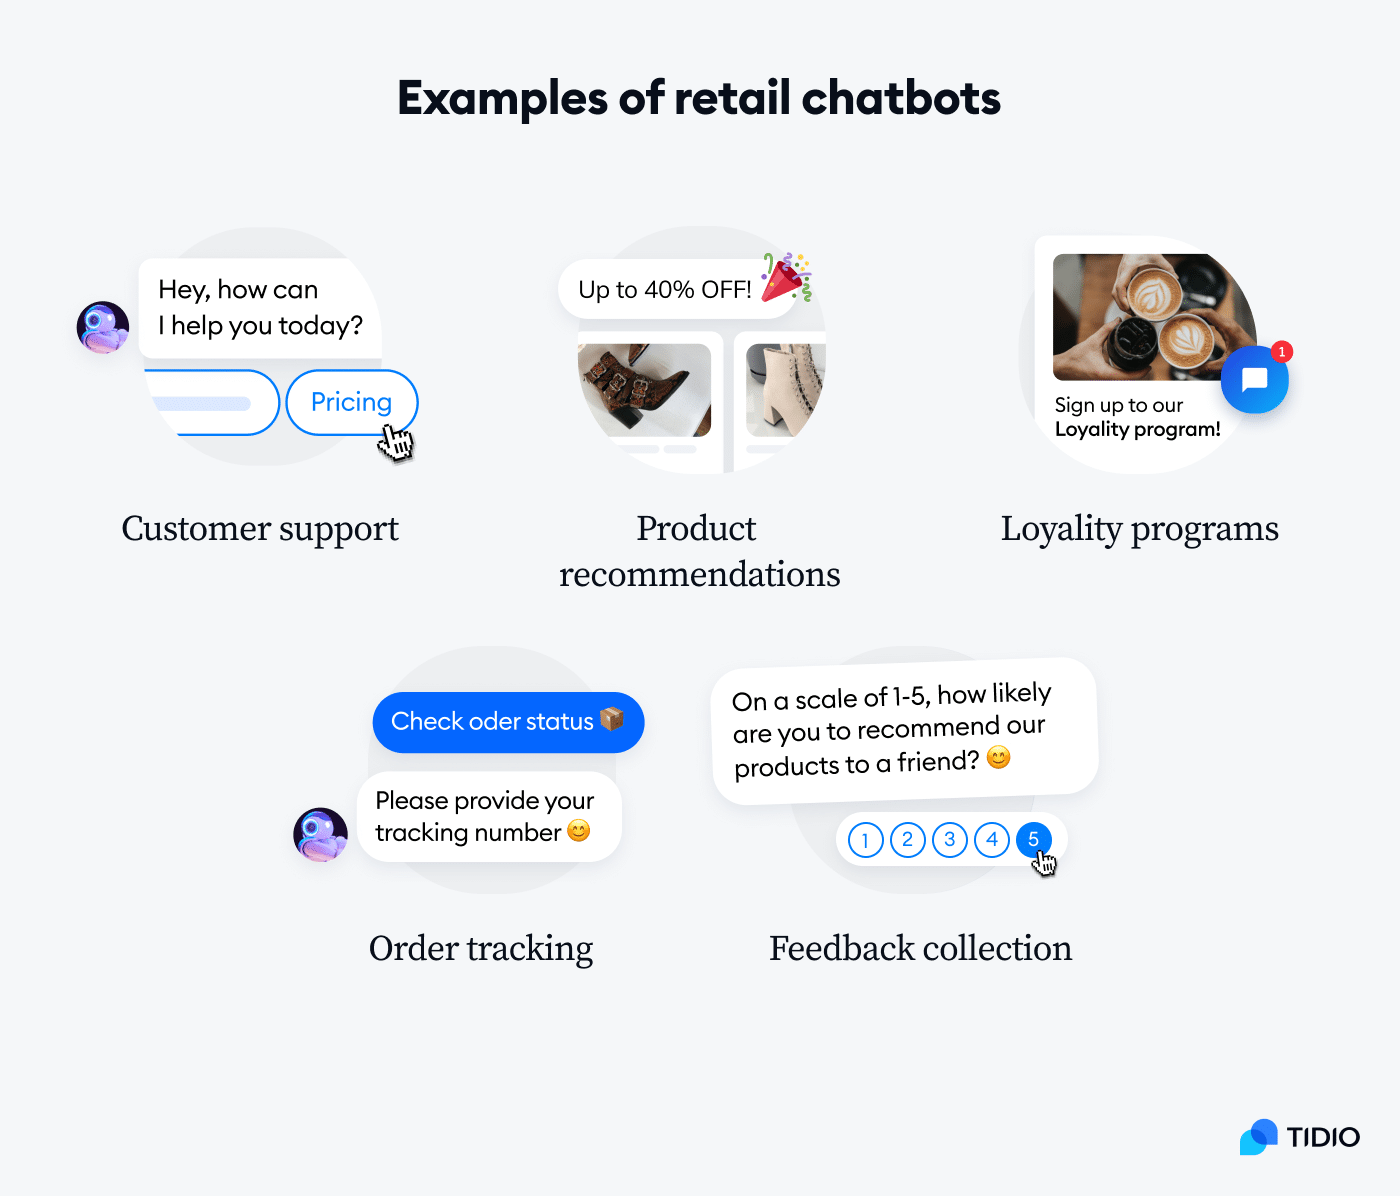 examples of retail chatbots on image